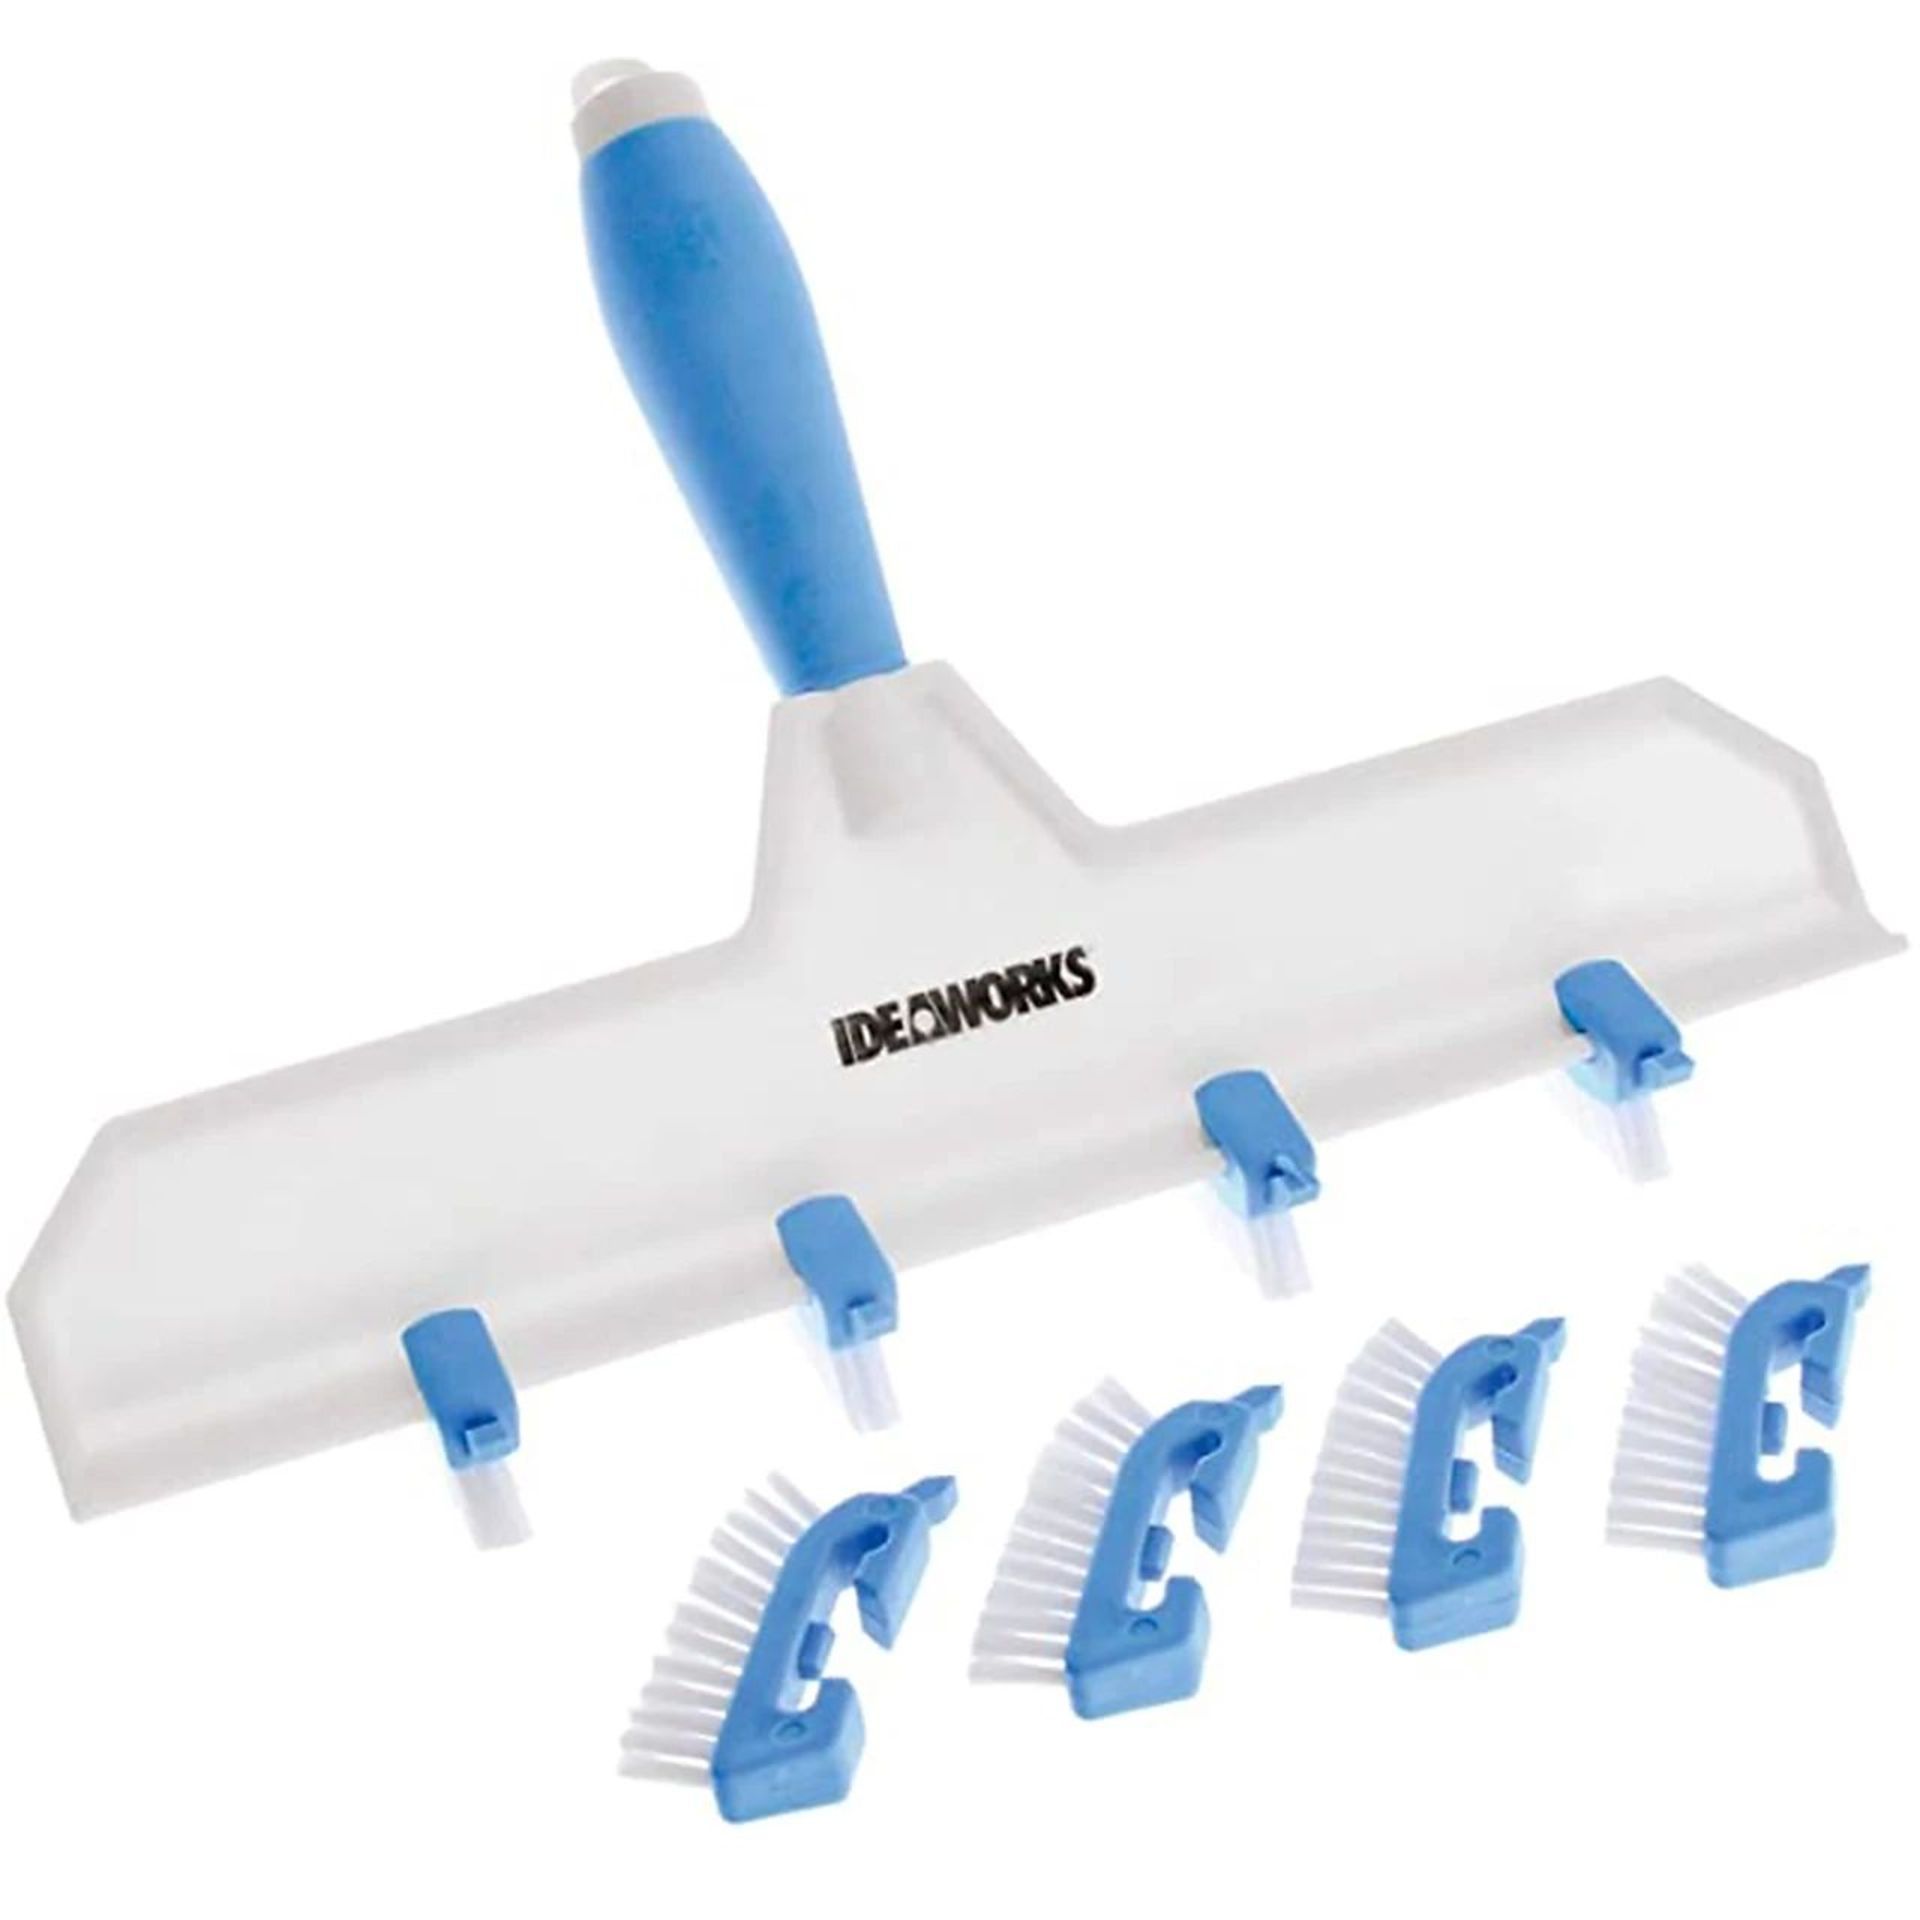 20 X BRAND NEW ADJUSTABLE HANDHELD GROUT CLEANING TOOLWITH SOFT GRIP HANDLE AND 8 MINI BRUSH HEADS - Bild 3 aus 3